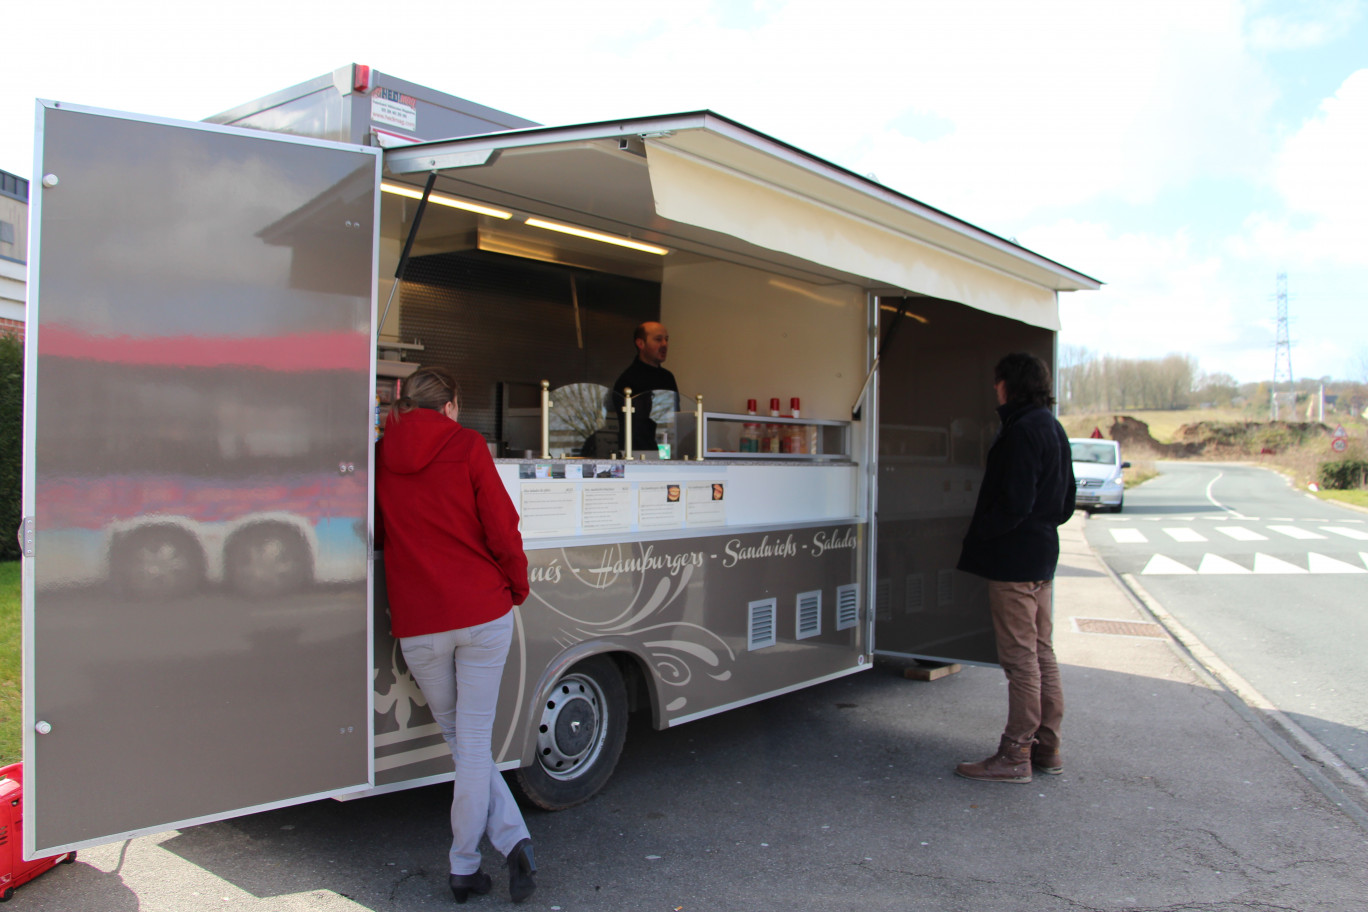 « David Mobailly dans son food truck ».